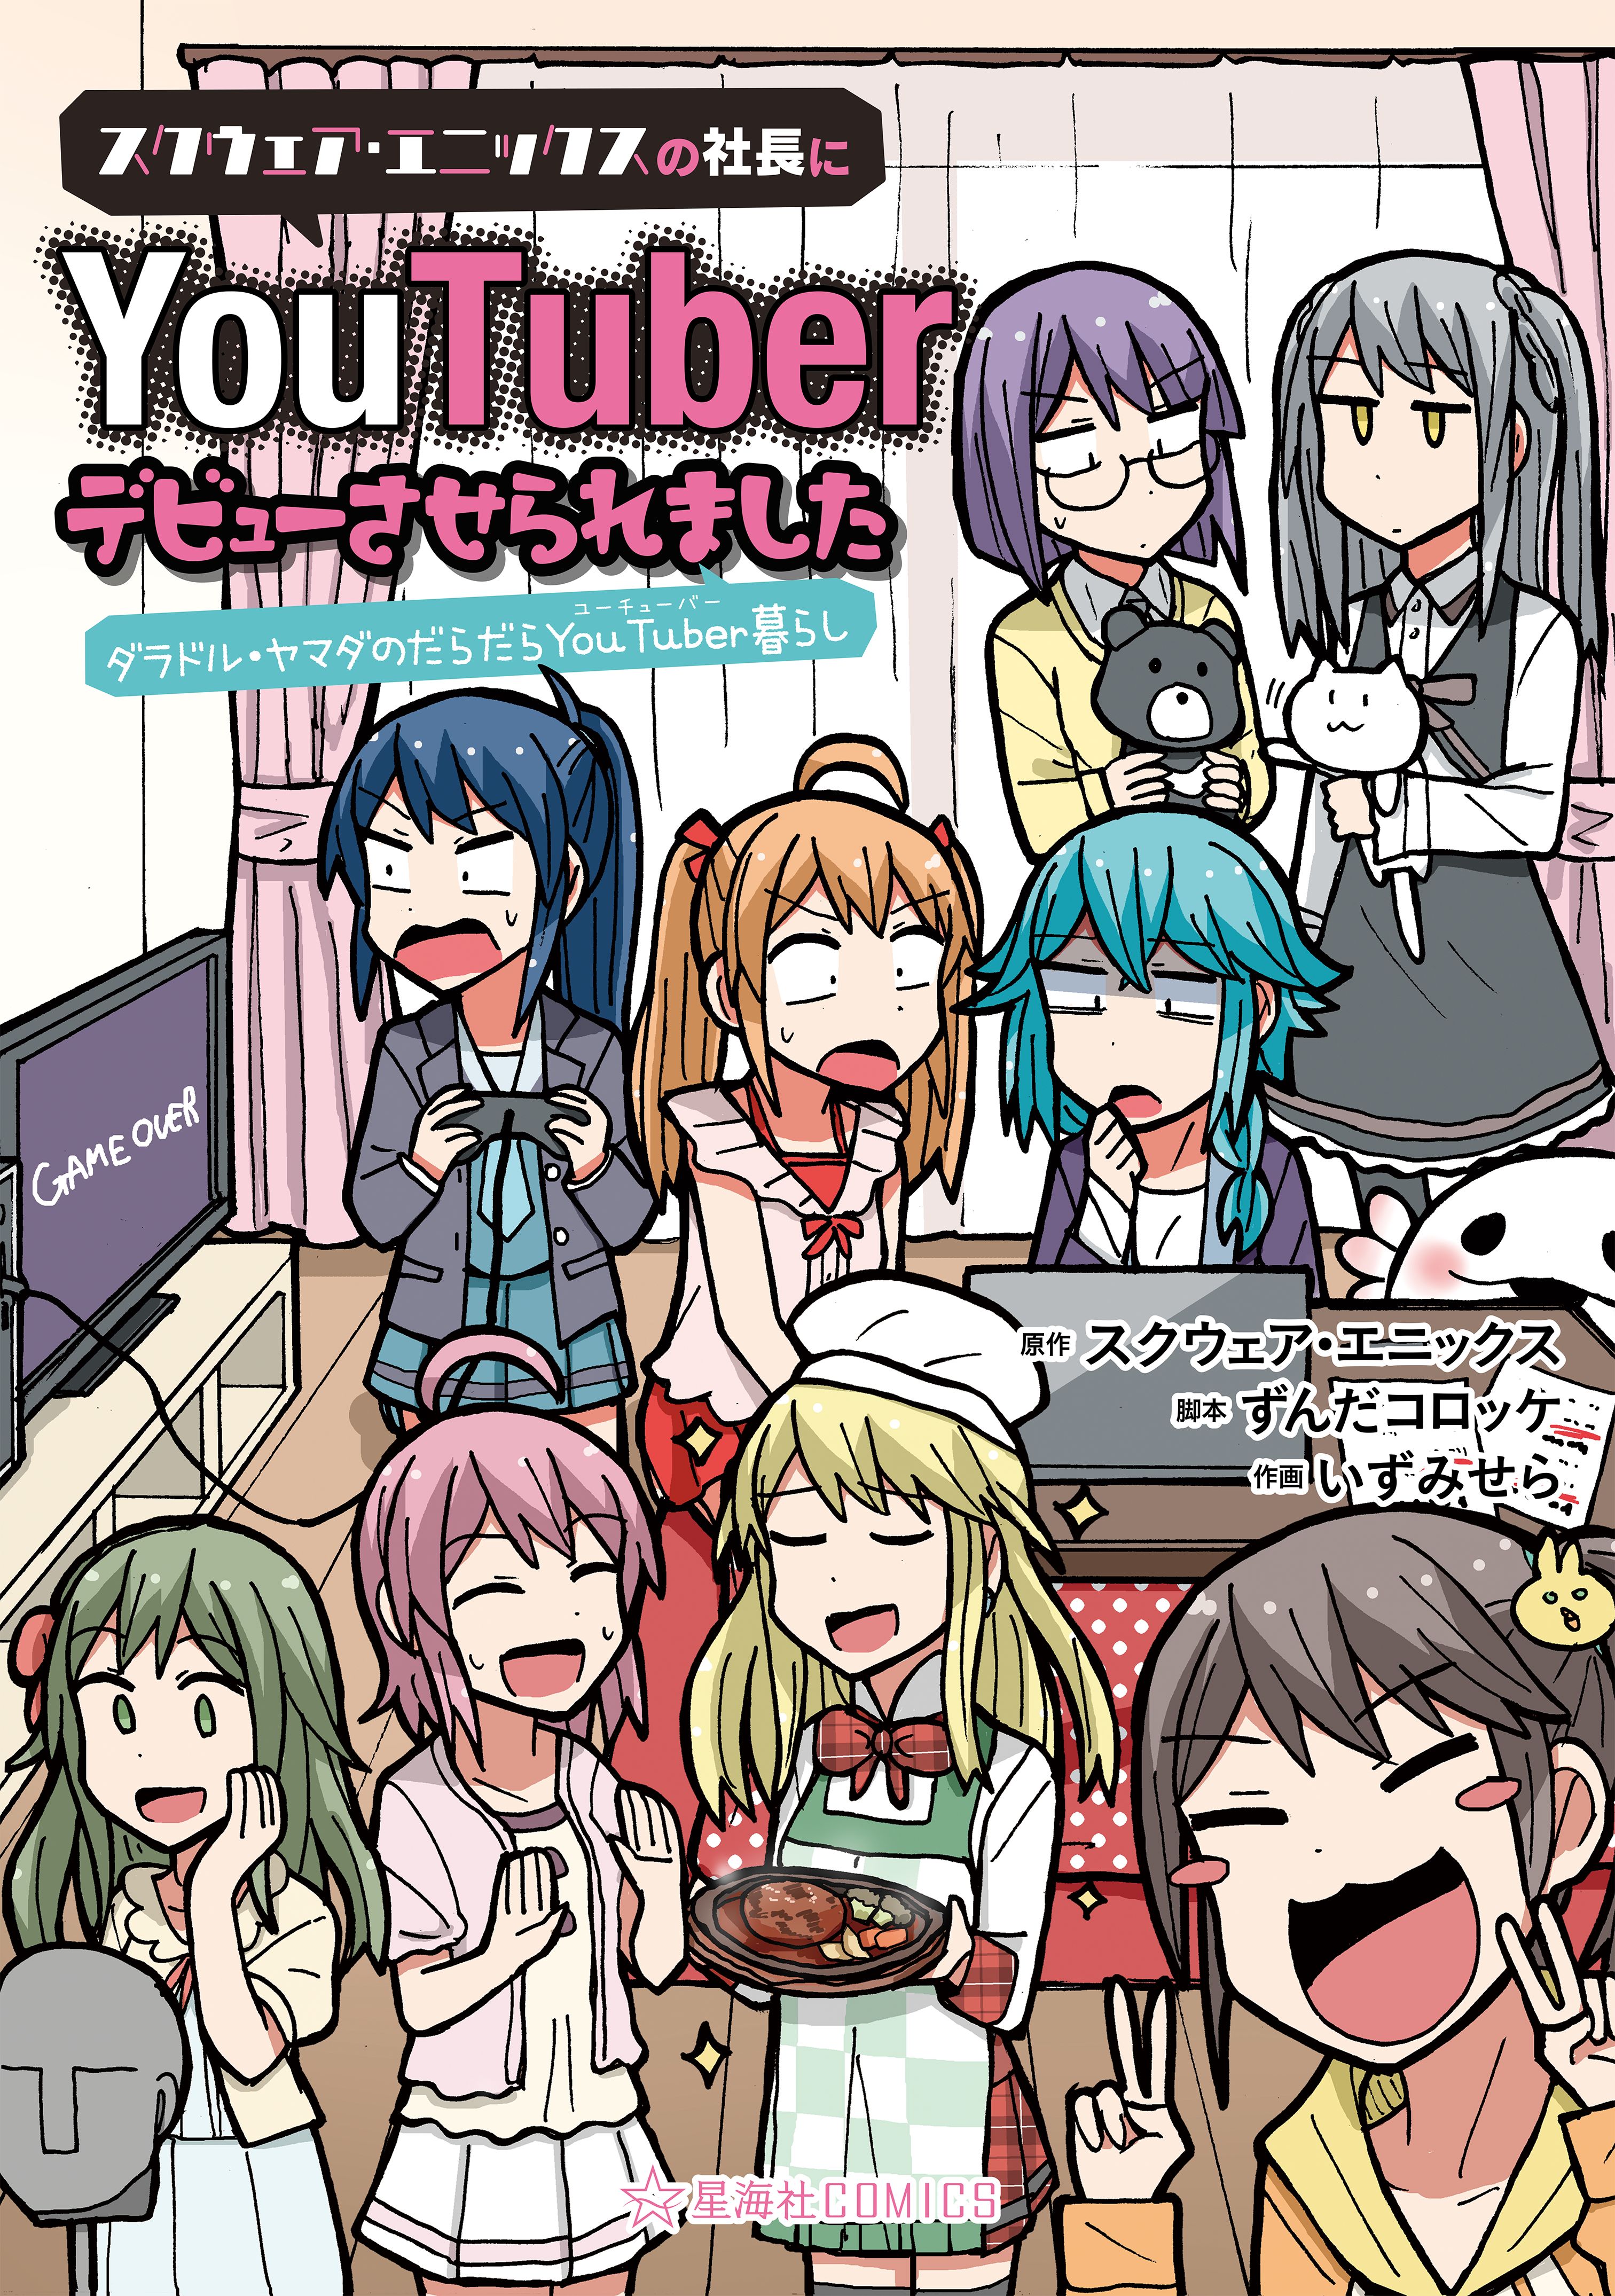 Project Tokyo Dolls - Lazy Idol Yamada's Life as a Youtuber